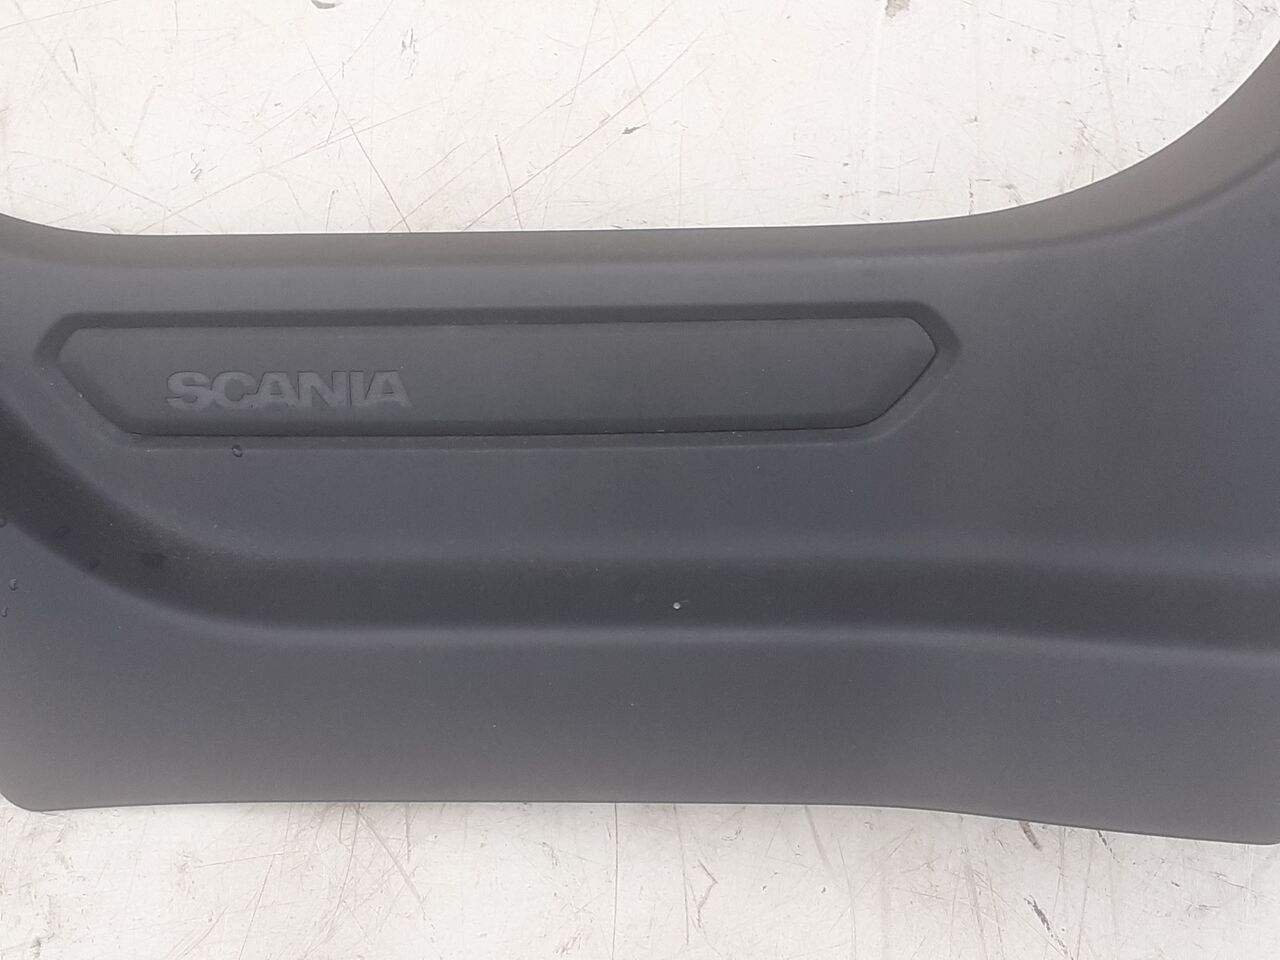 P450 2419483 front fascia for Scania L,P,G,R,S series truck